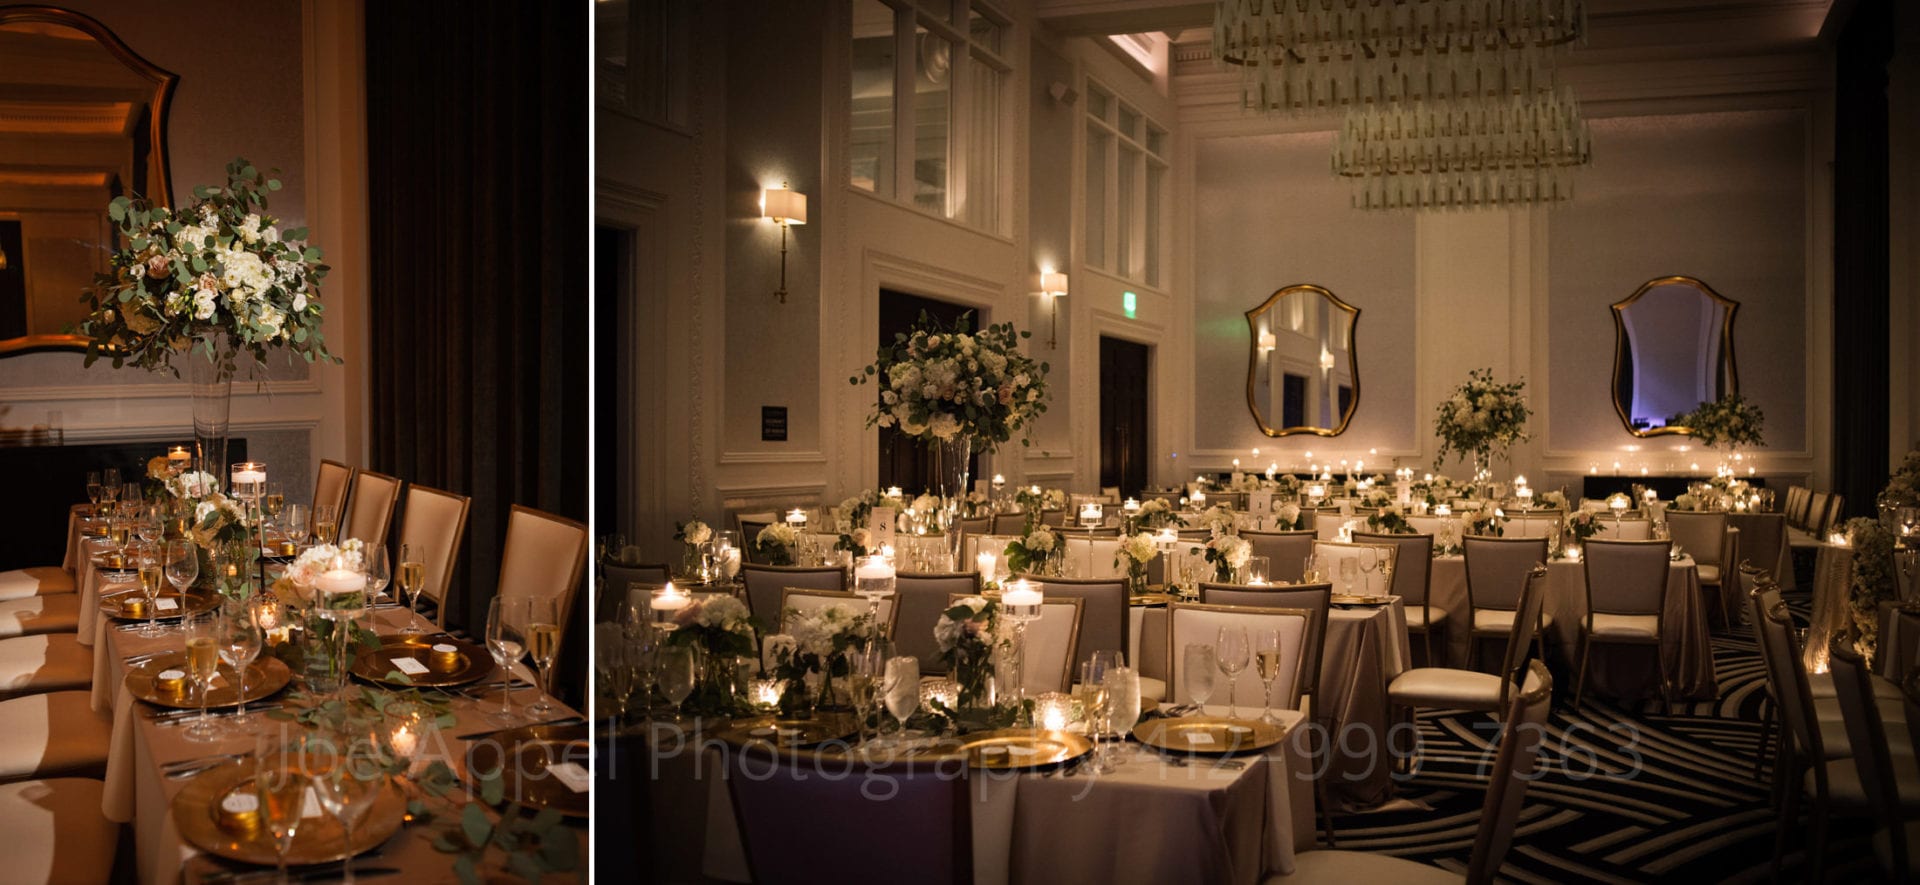 candles illuminate a dining area decorated in white and gold